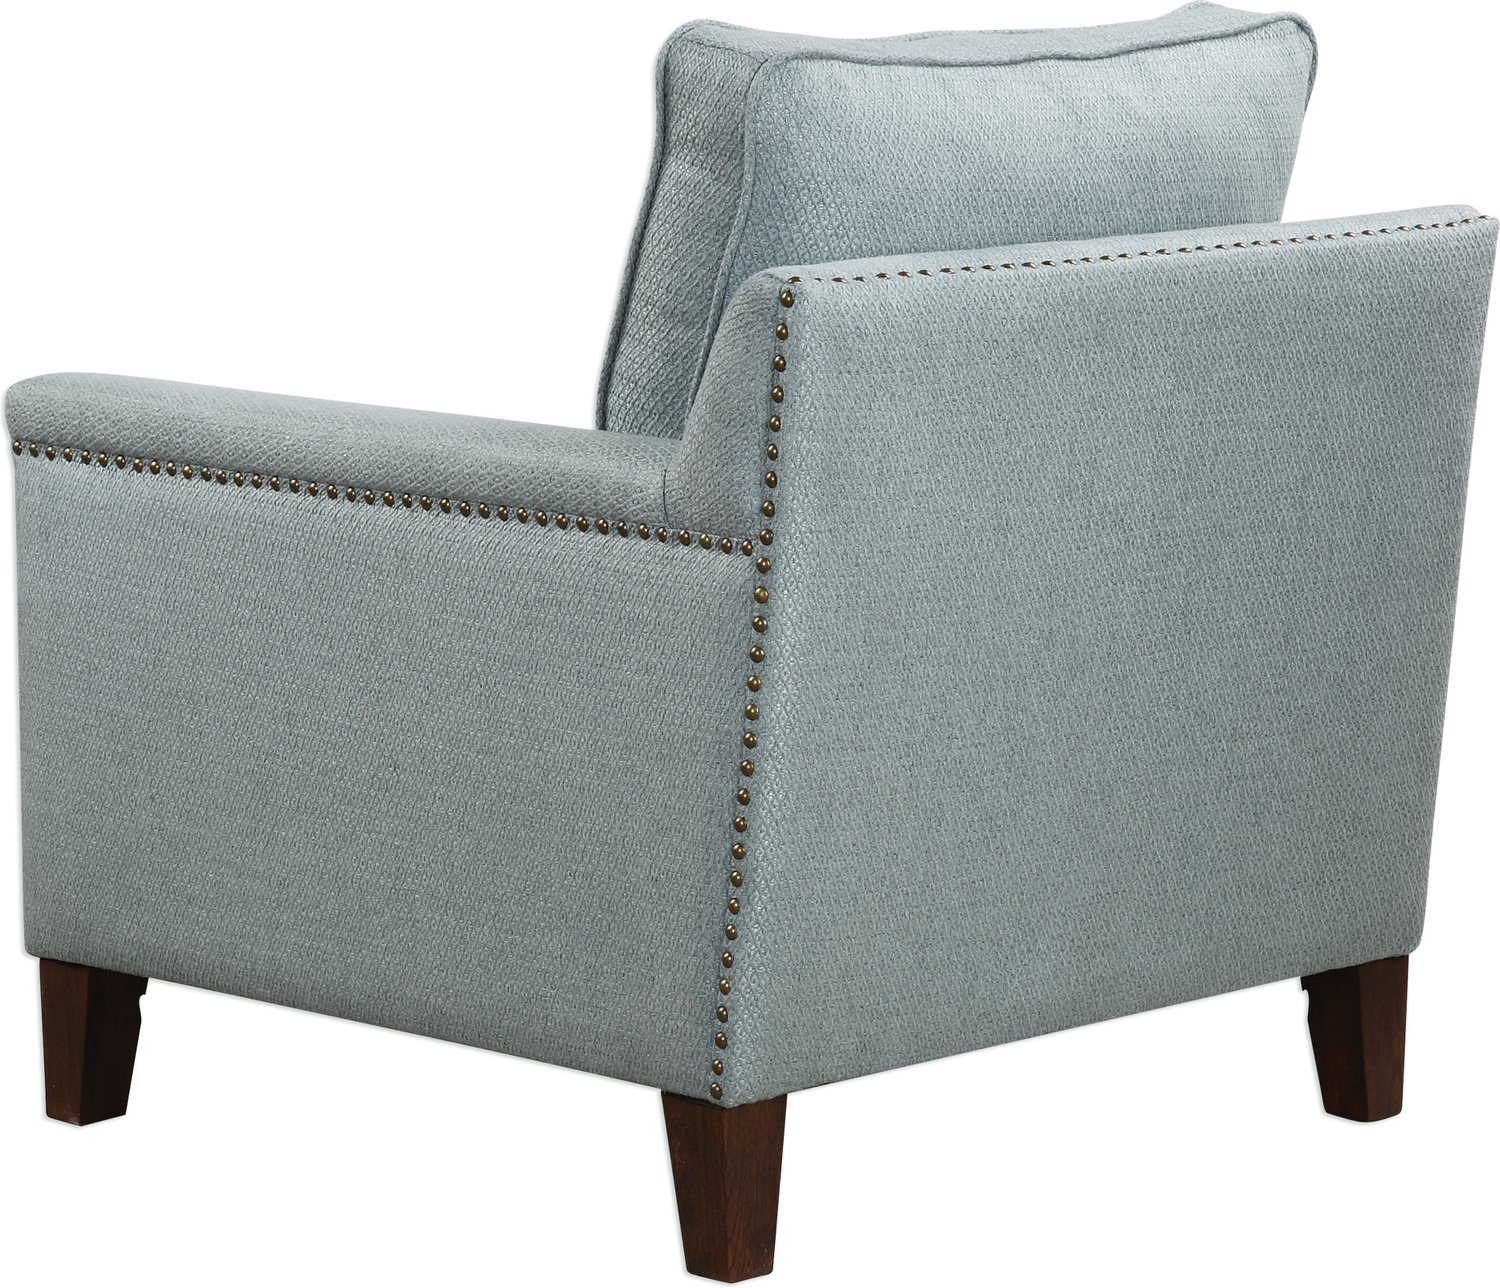 modern easy chair Uttermost  Accent Chairs & Armchairs Supportive Comfort In A Transitional Club Chair, With A Subtle Woven Argyle Pattern In Light Sea Mist, Accented With Antique Brass Nail Head Trim On Solid Oak Legs Finished In Dark Walnut. Seat Height Is 19".